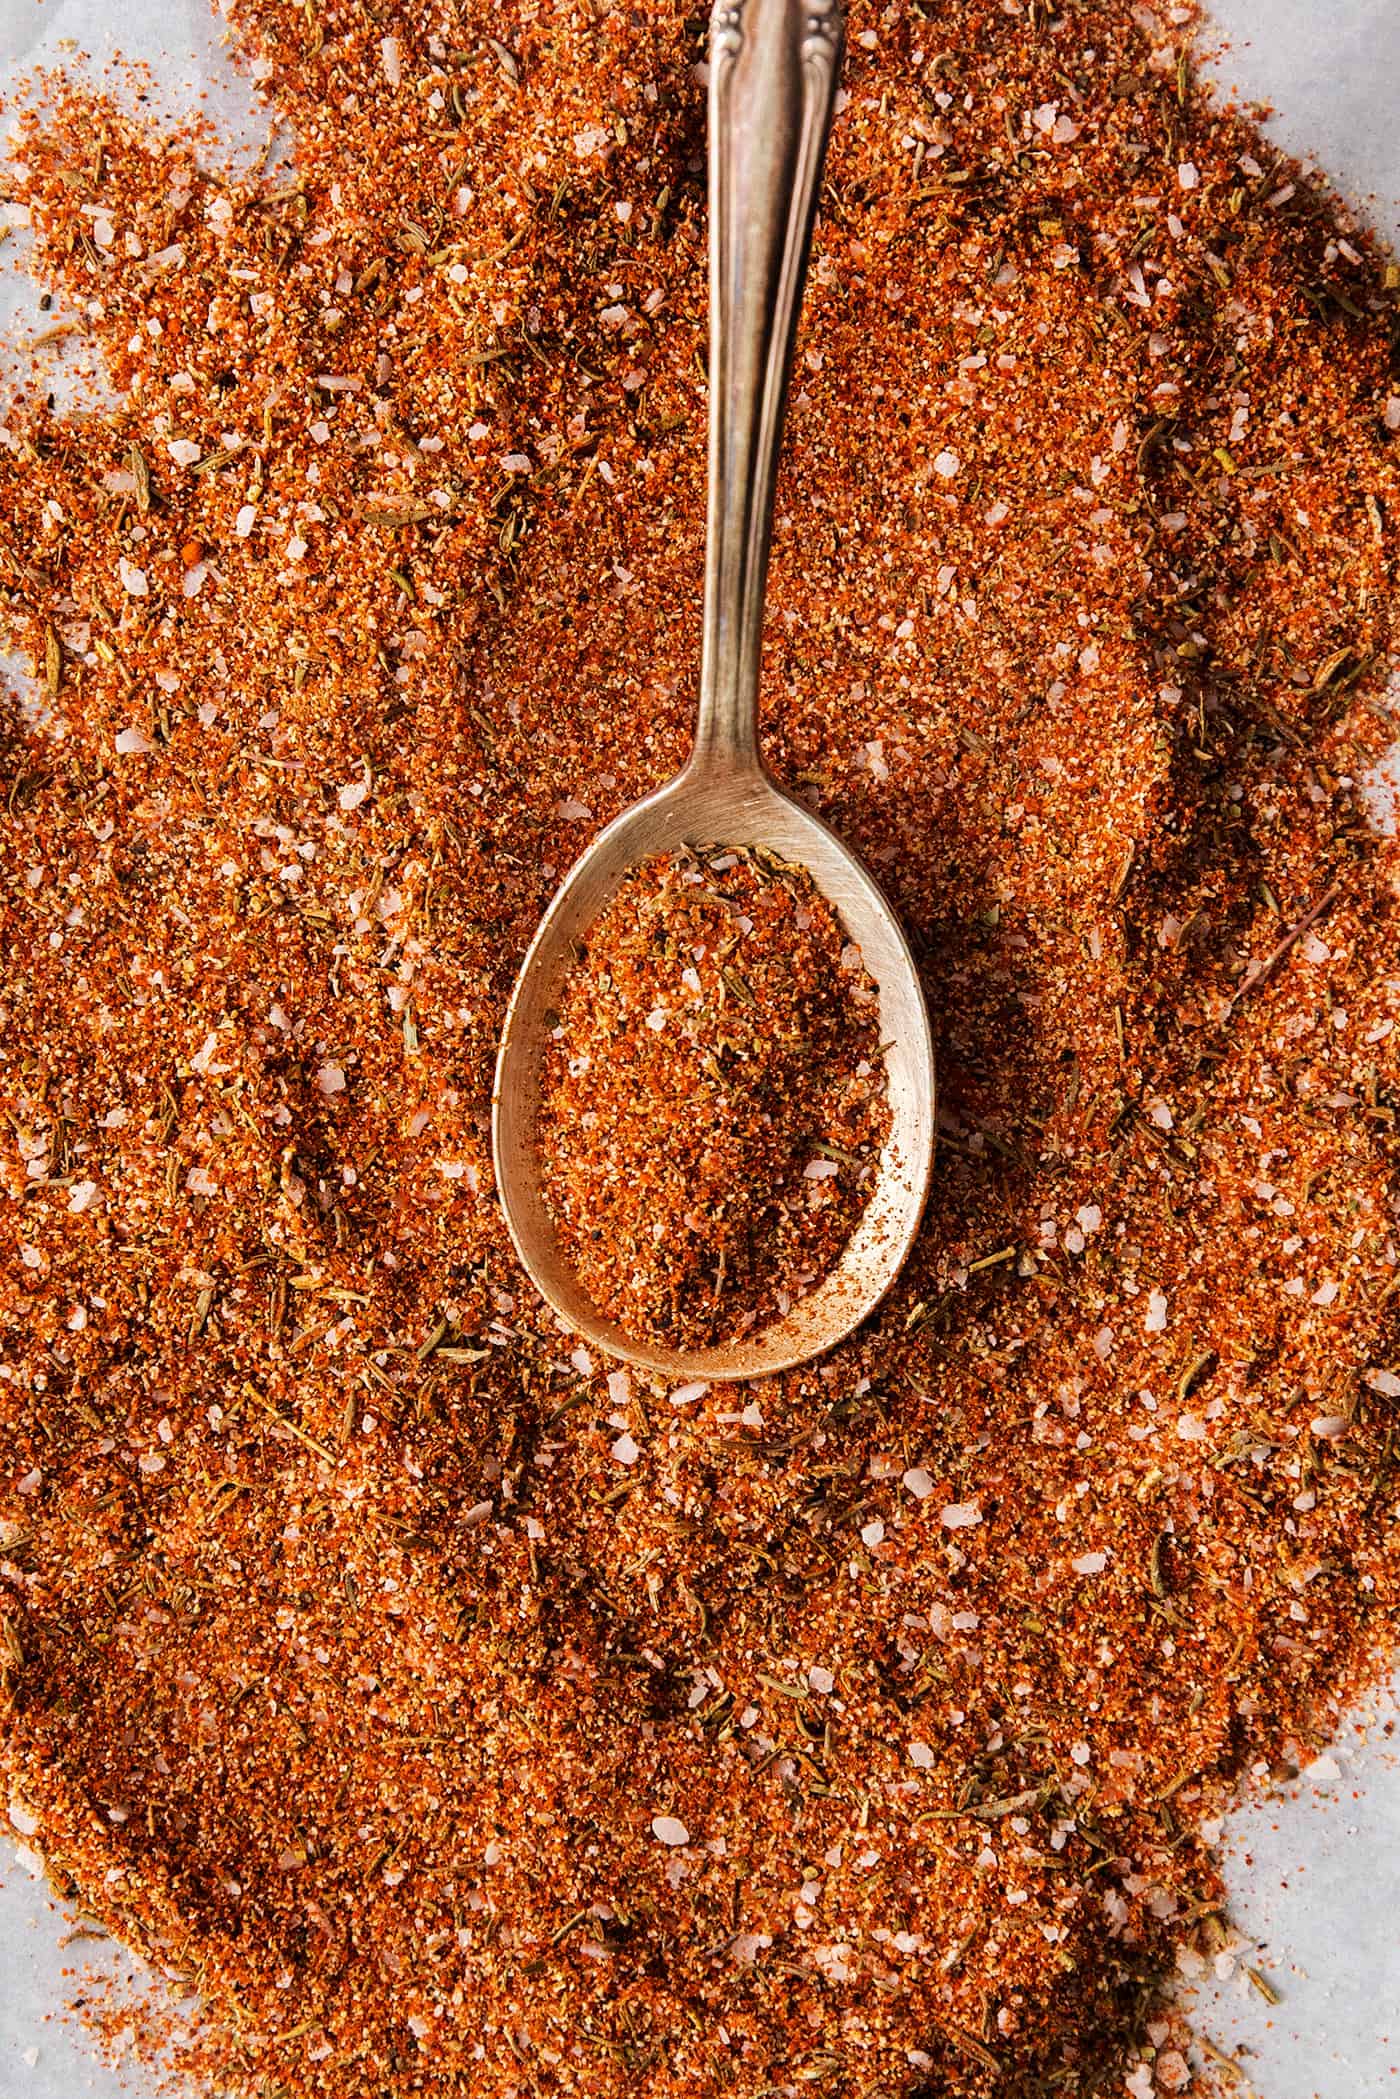 dried spices and herbs mixed, with a spoon